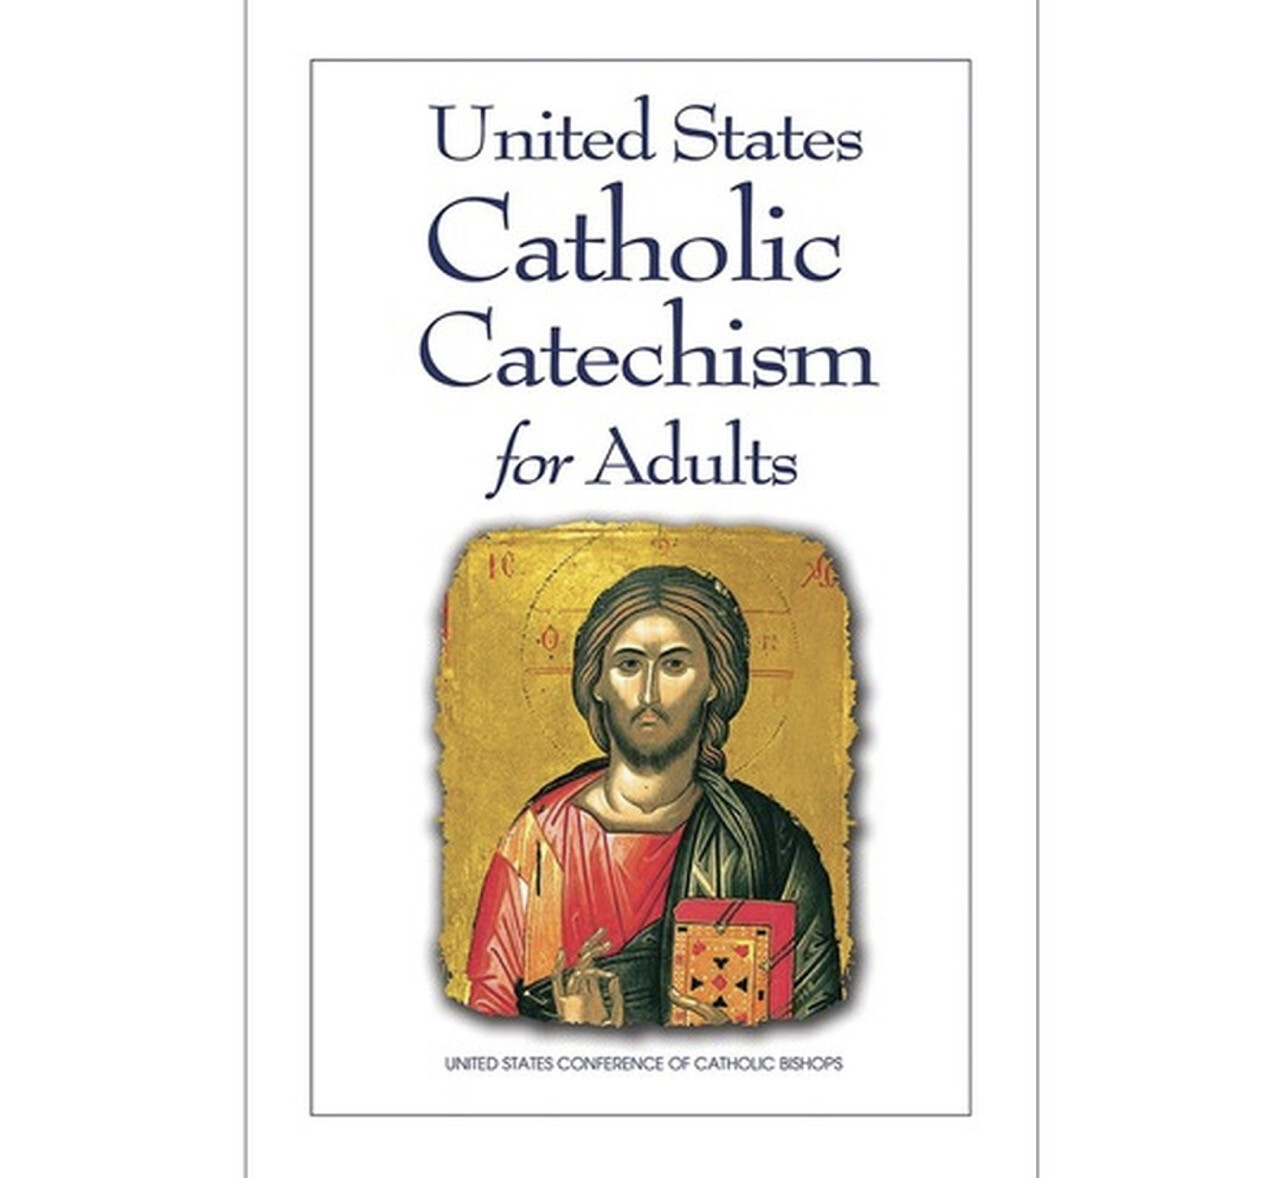 United States Catholic Catechism for Adults - Revised Edition